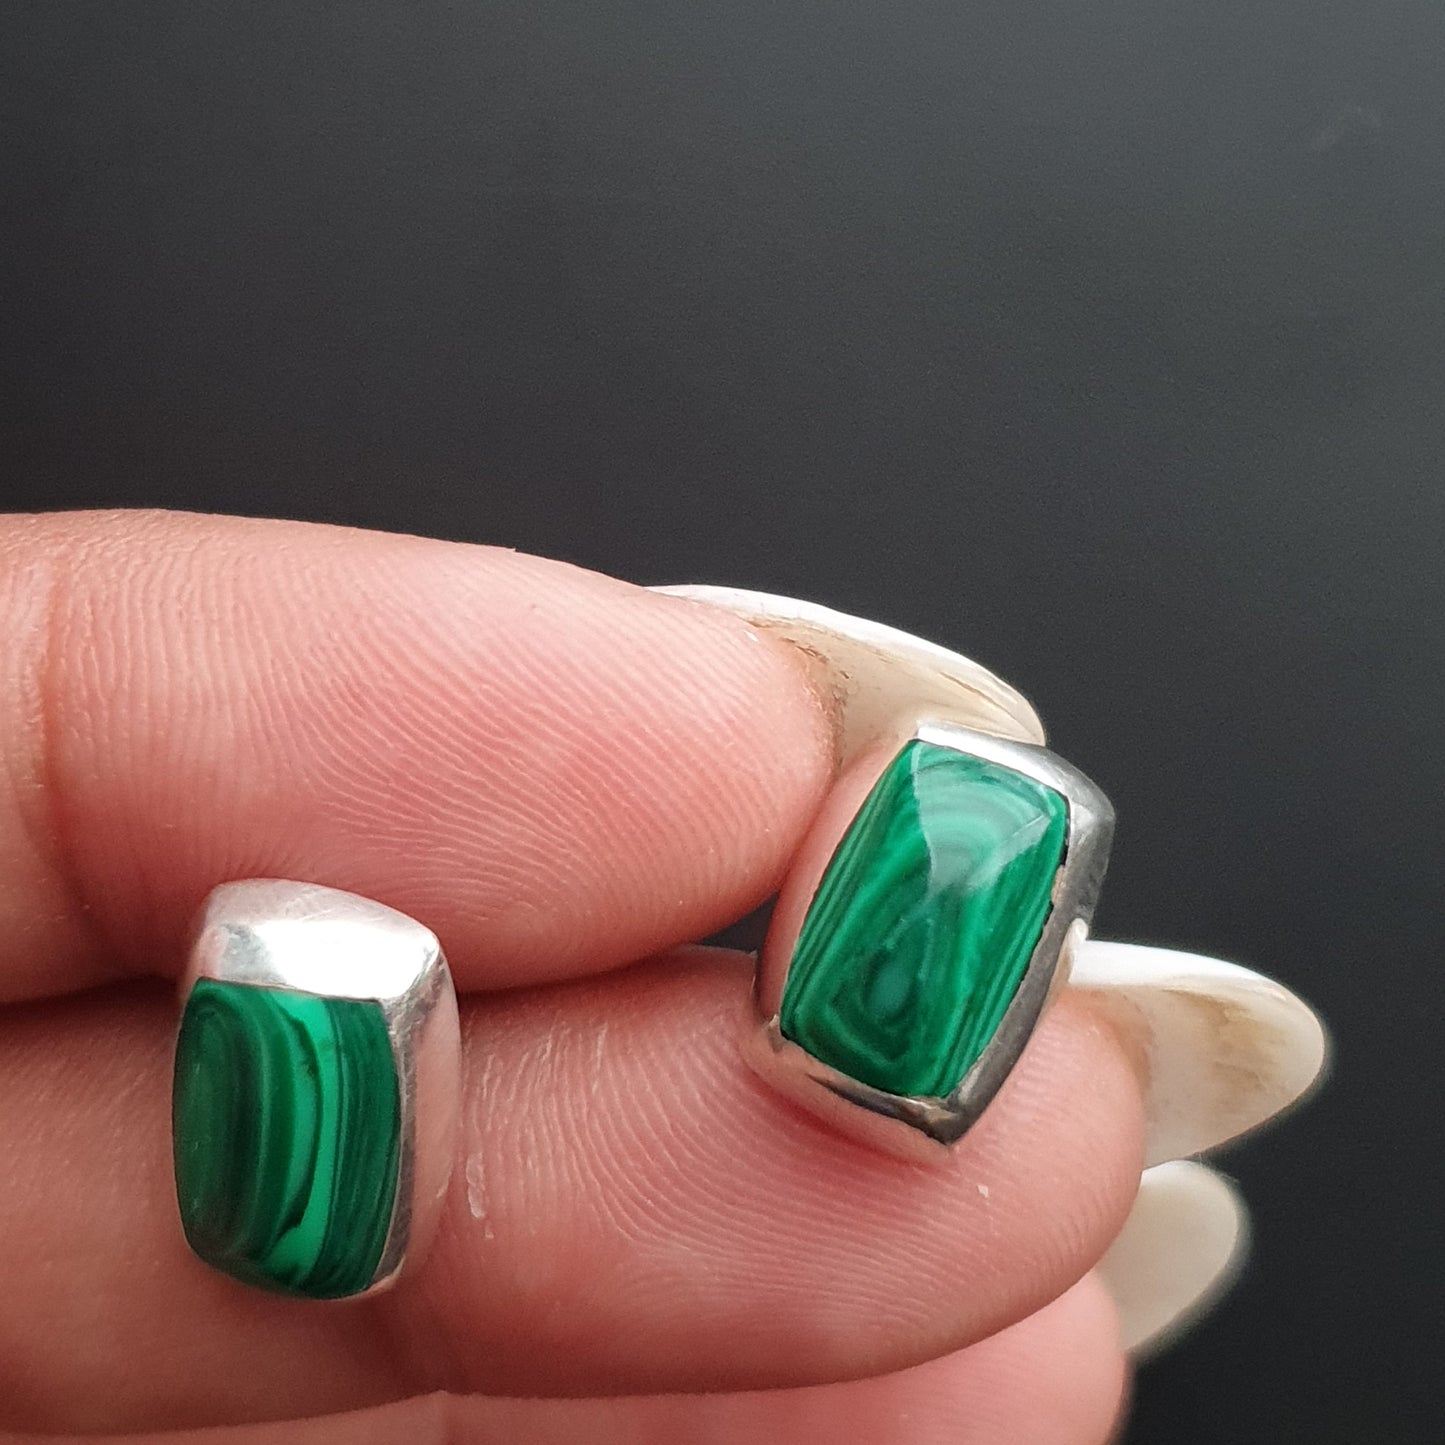 Studs, rectangular,earrings, malachite, gemstone, sterling silver, gifts, vintage, handmade, free shipping, classic, statement,925, emerald